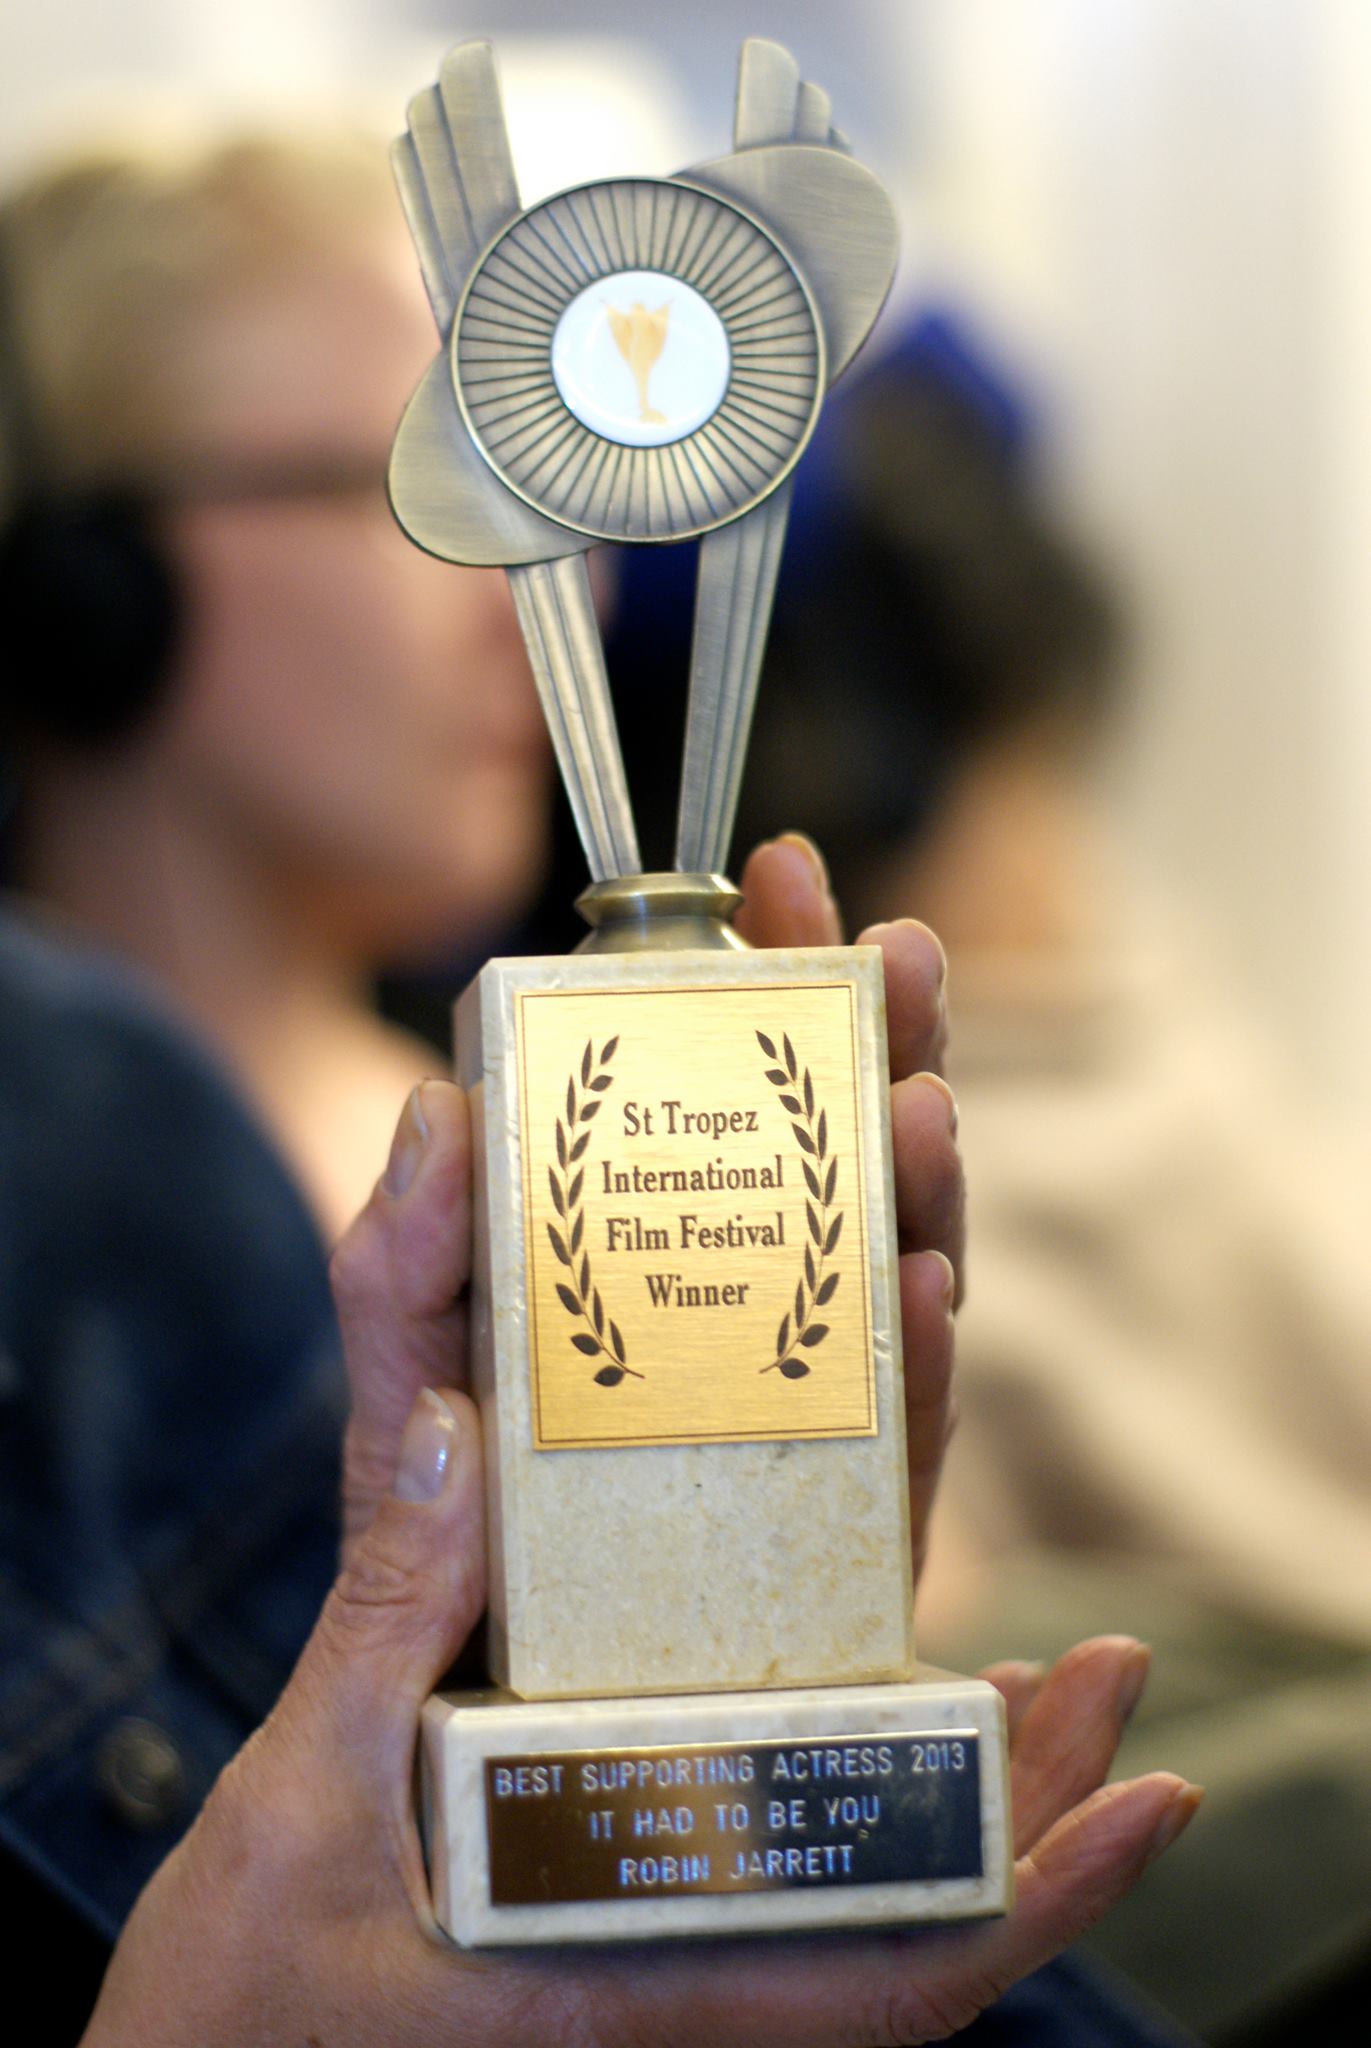 Award for the Best Supporting Actress at The 2013 St. Tropez International Film Awards in the Cote'd'Azur,France